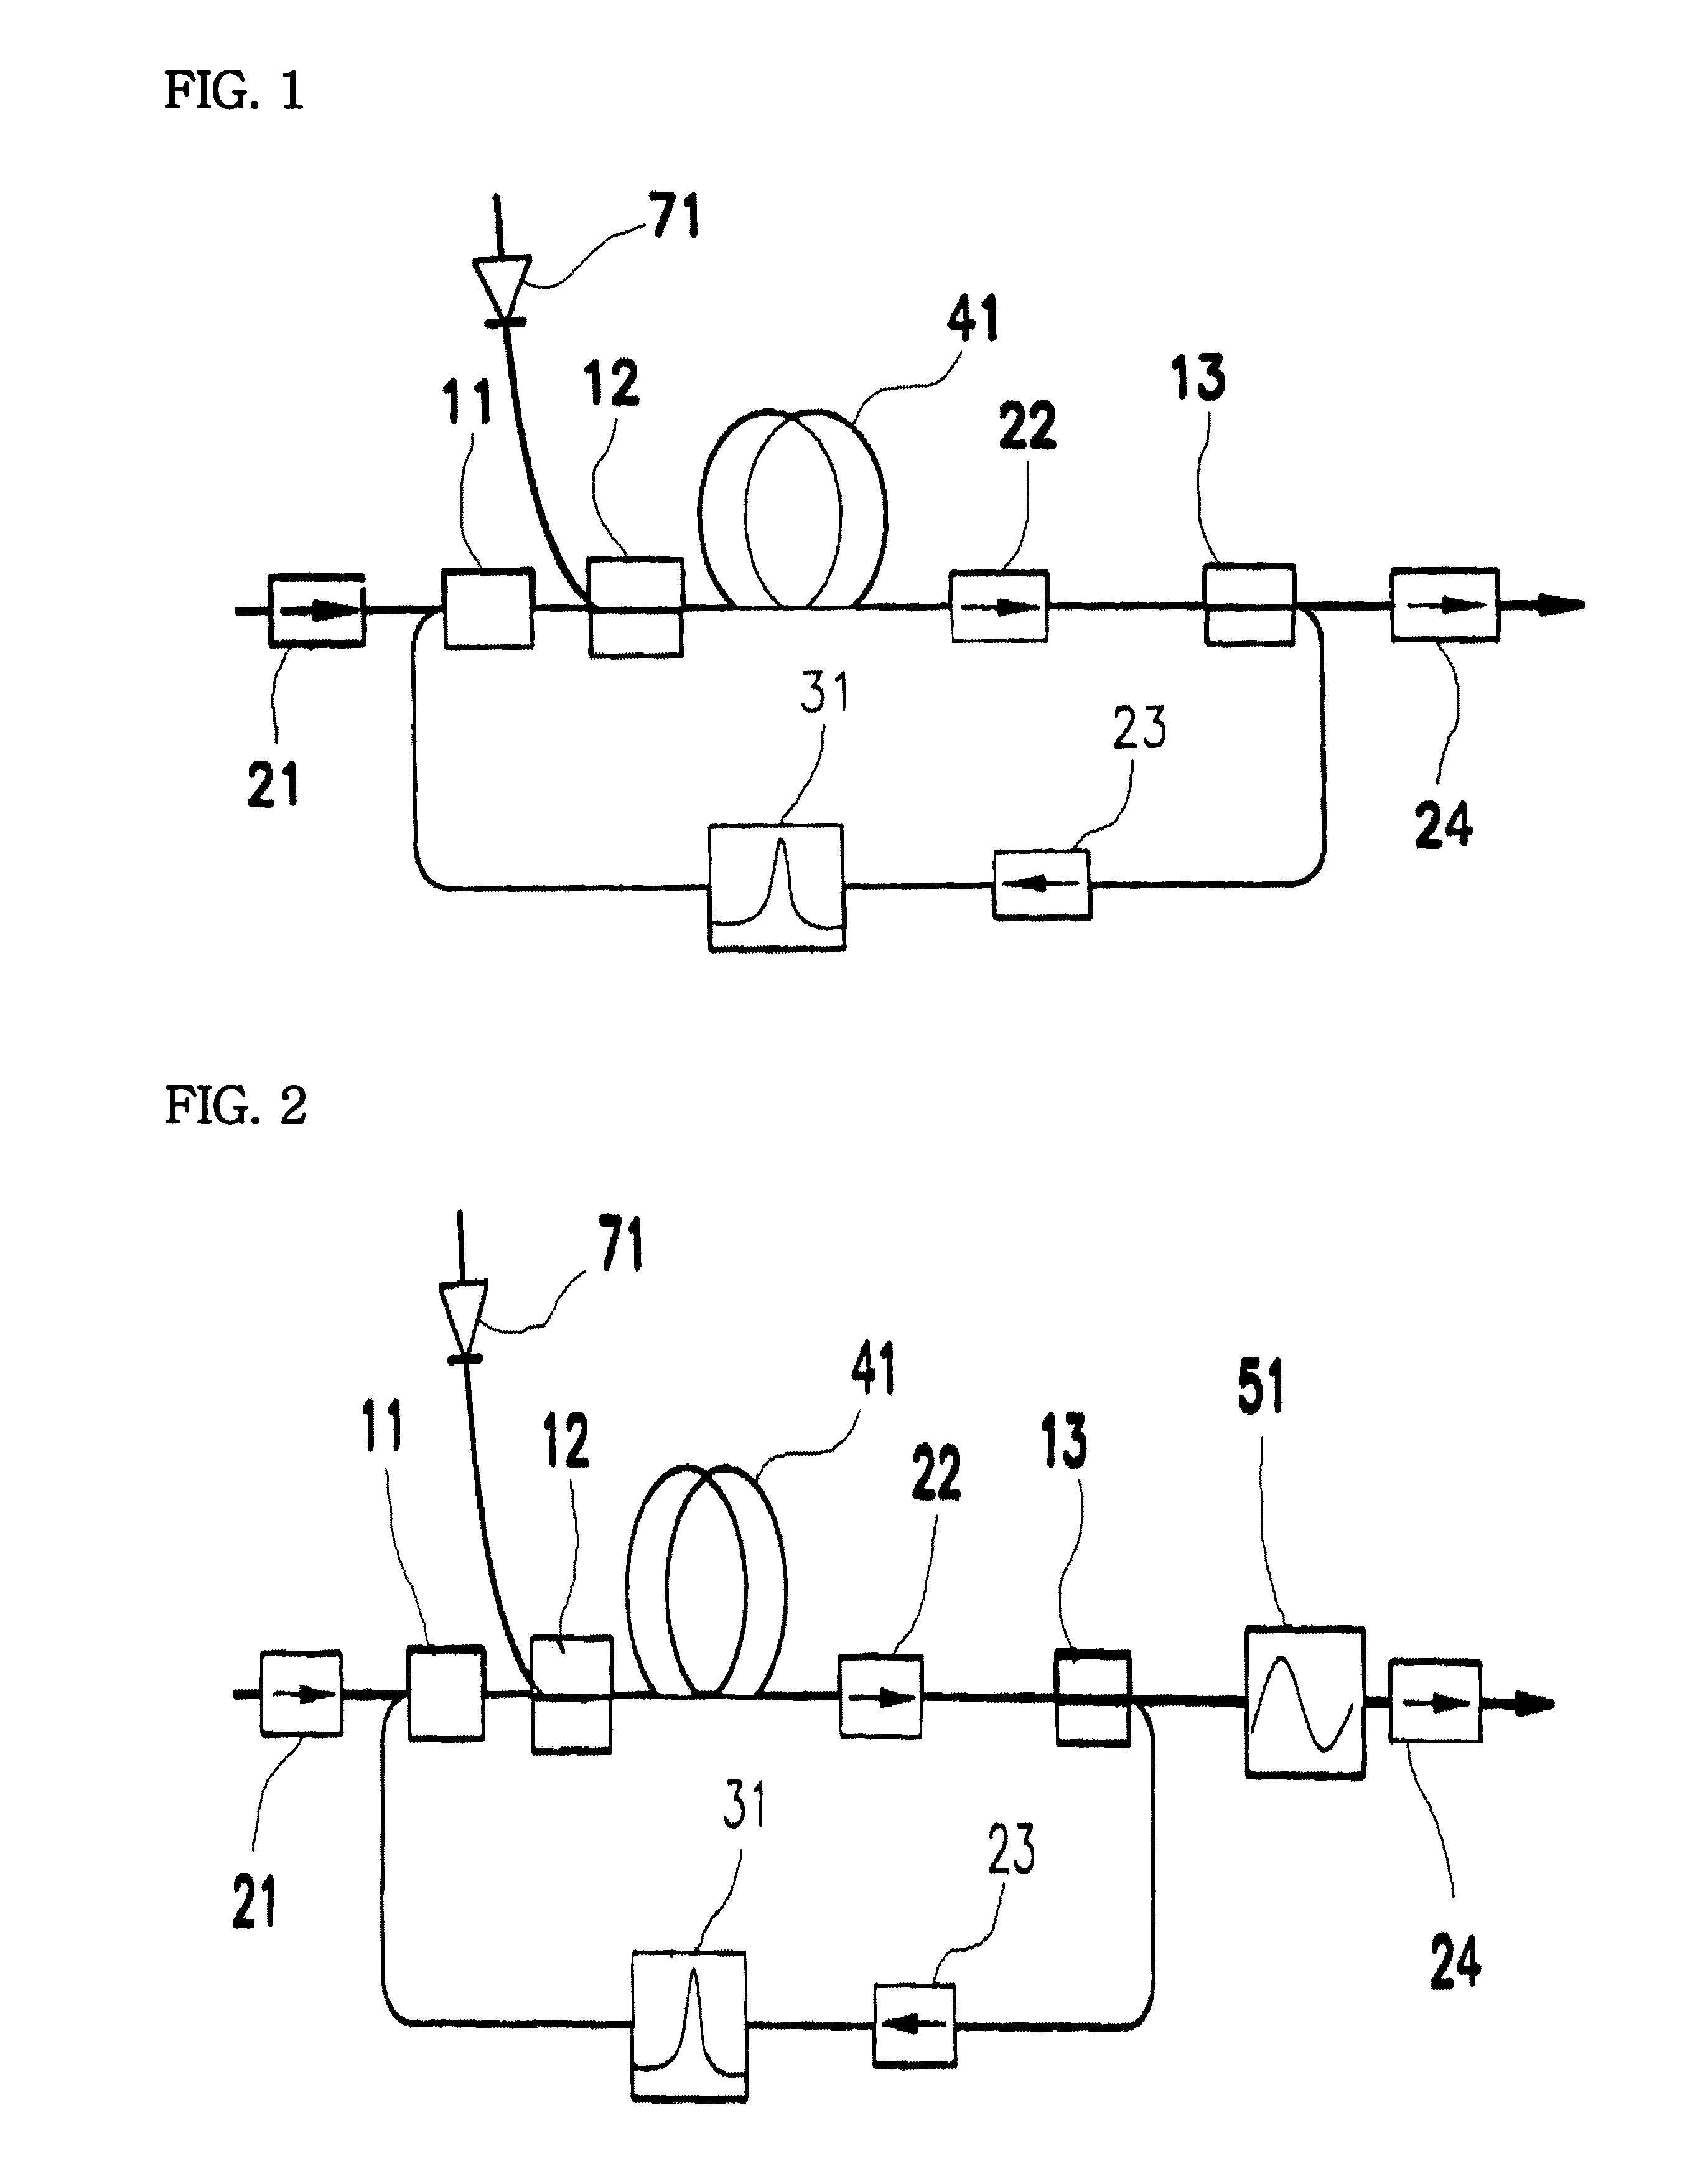 Optical fiber amplifier for clamping and equalizing gain in optical communication system